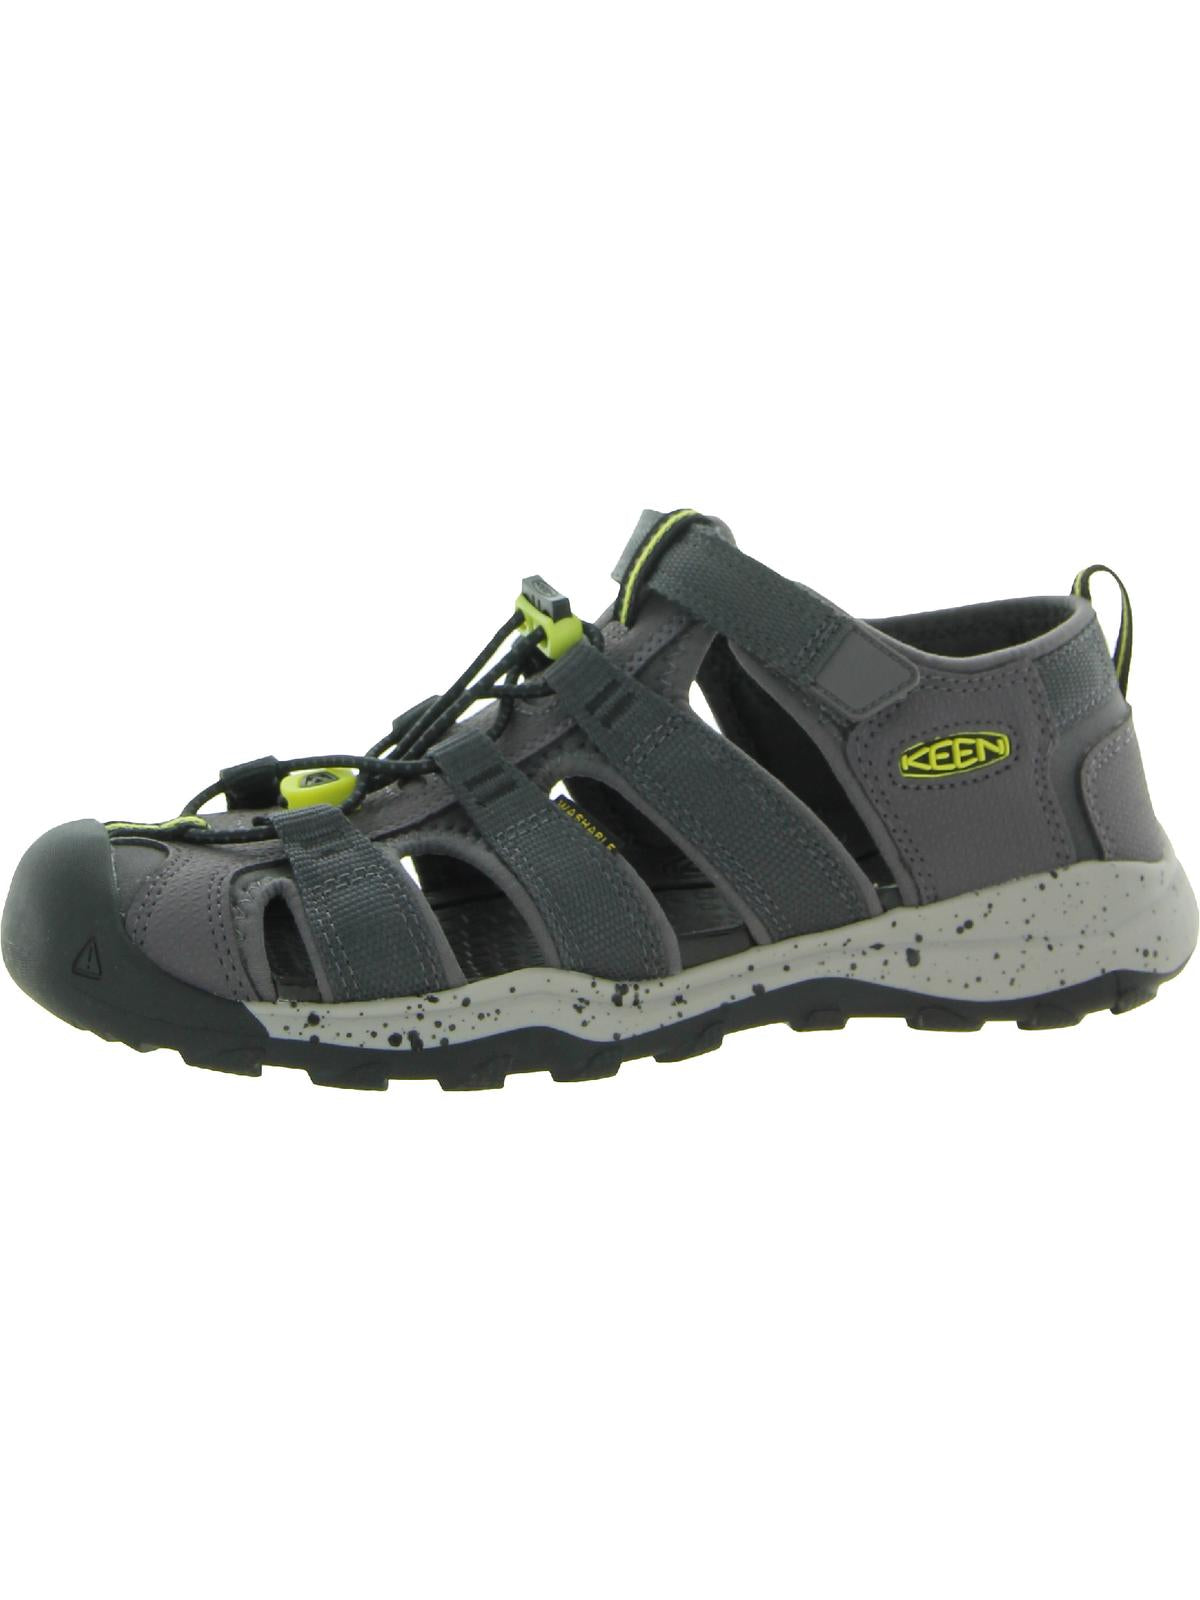 Keen Newport Neo H2 Boys Toe Cap Laceless Strappy Sandals US 5 Big Kid male